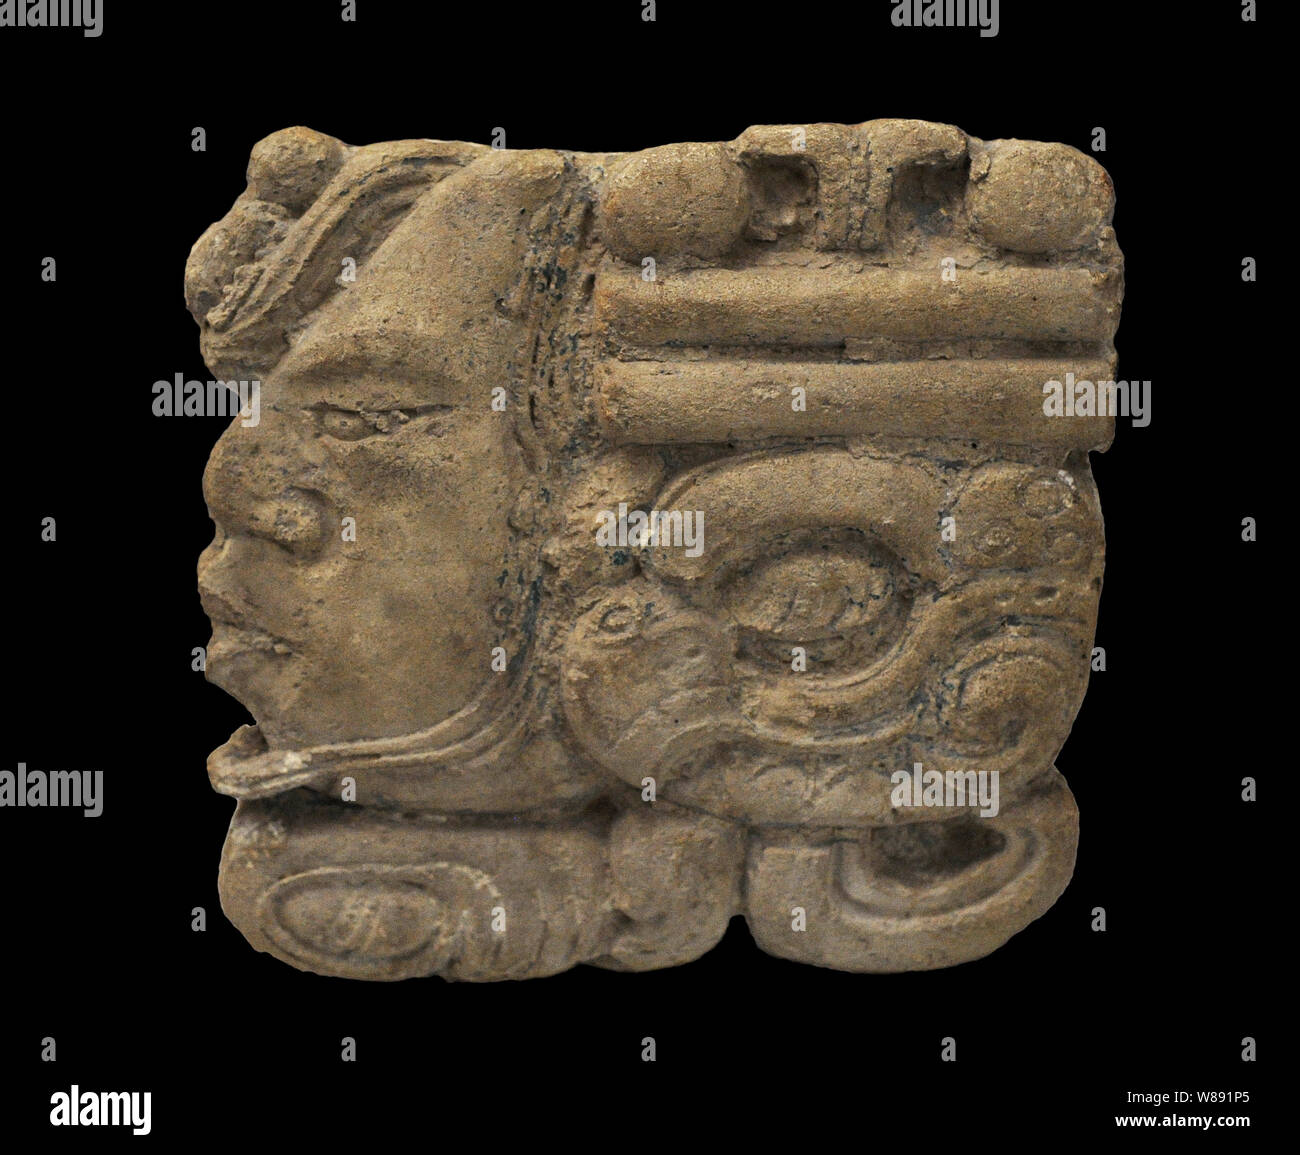 Numerical glyph depicting numeral 4. Palenque. Maya culture. Late Classic period (600-900 AD). Located on the facade of the Palace. It was collected in 1787 by captain Antonio del Rio. Stucco. Palenque, Mexico. Museum of the Americas. Madrid, Spain. Stock Photo